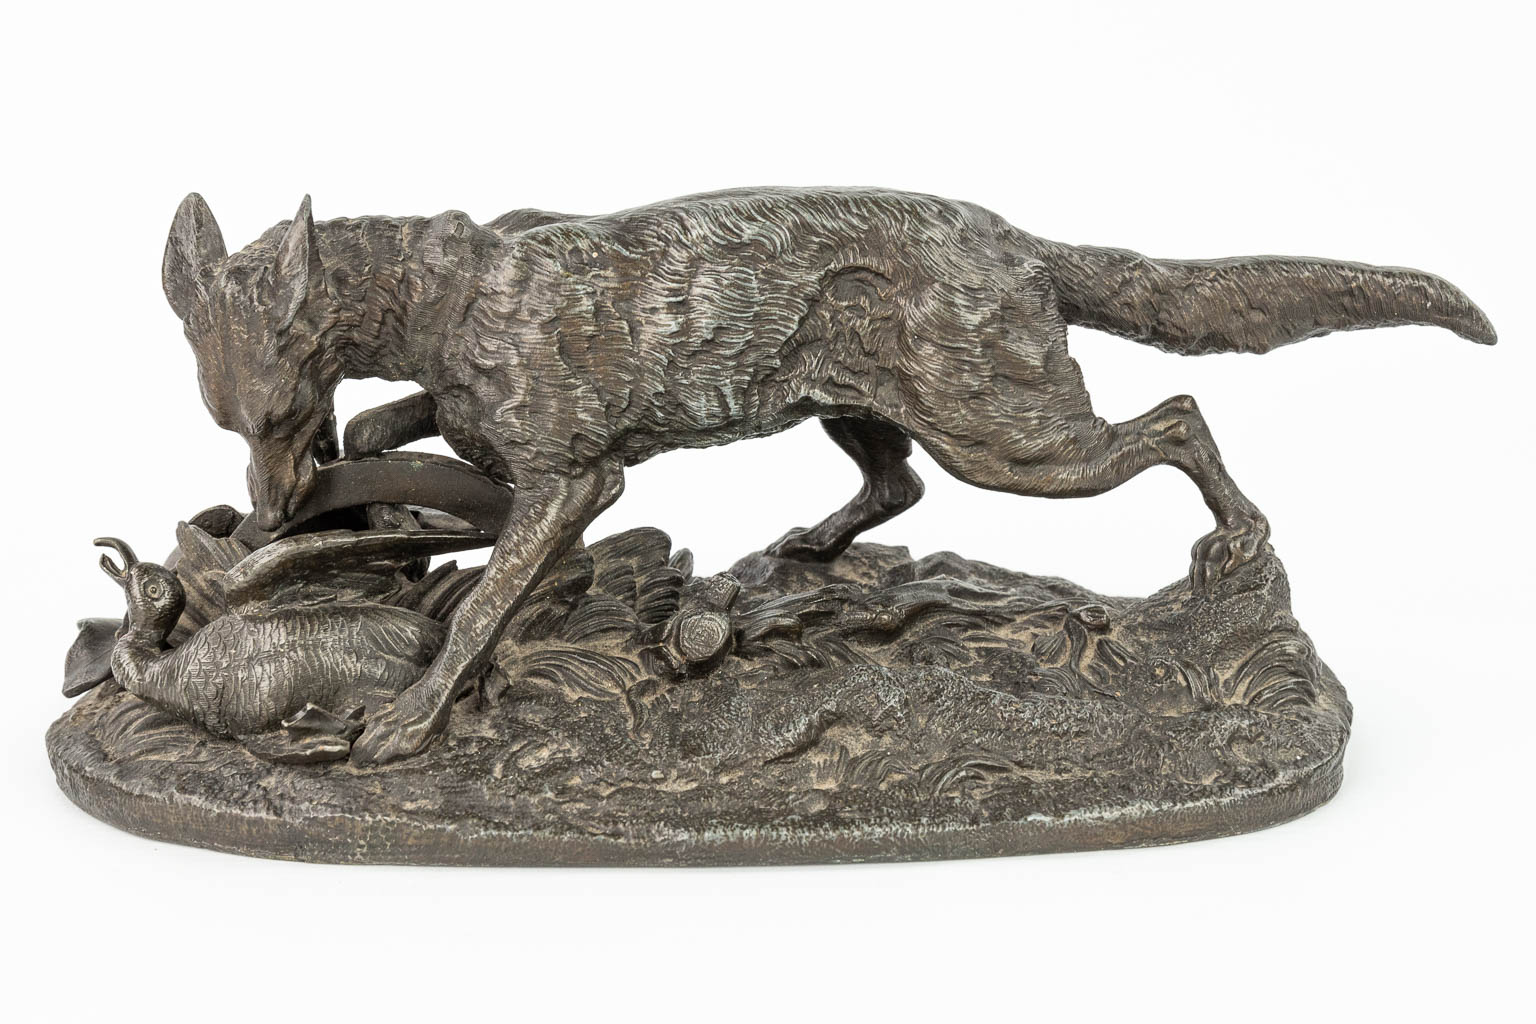 A collection of 3 figurines of animals, made of bronze and spelter. A lion, wolf and bear. (H:11cm)